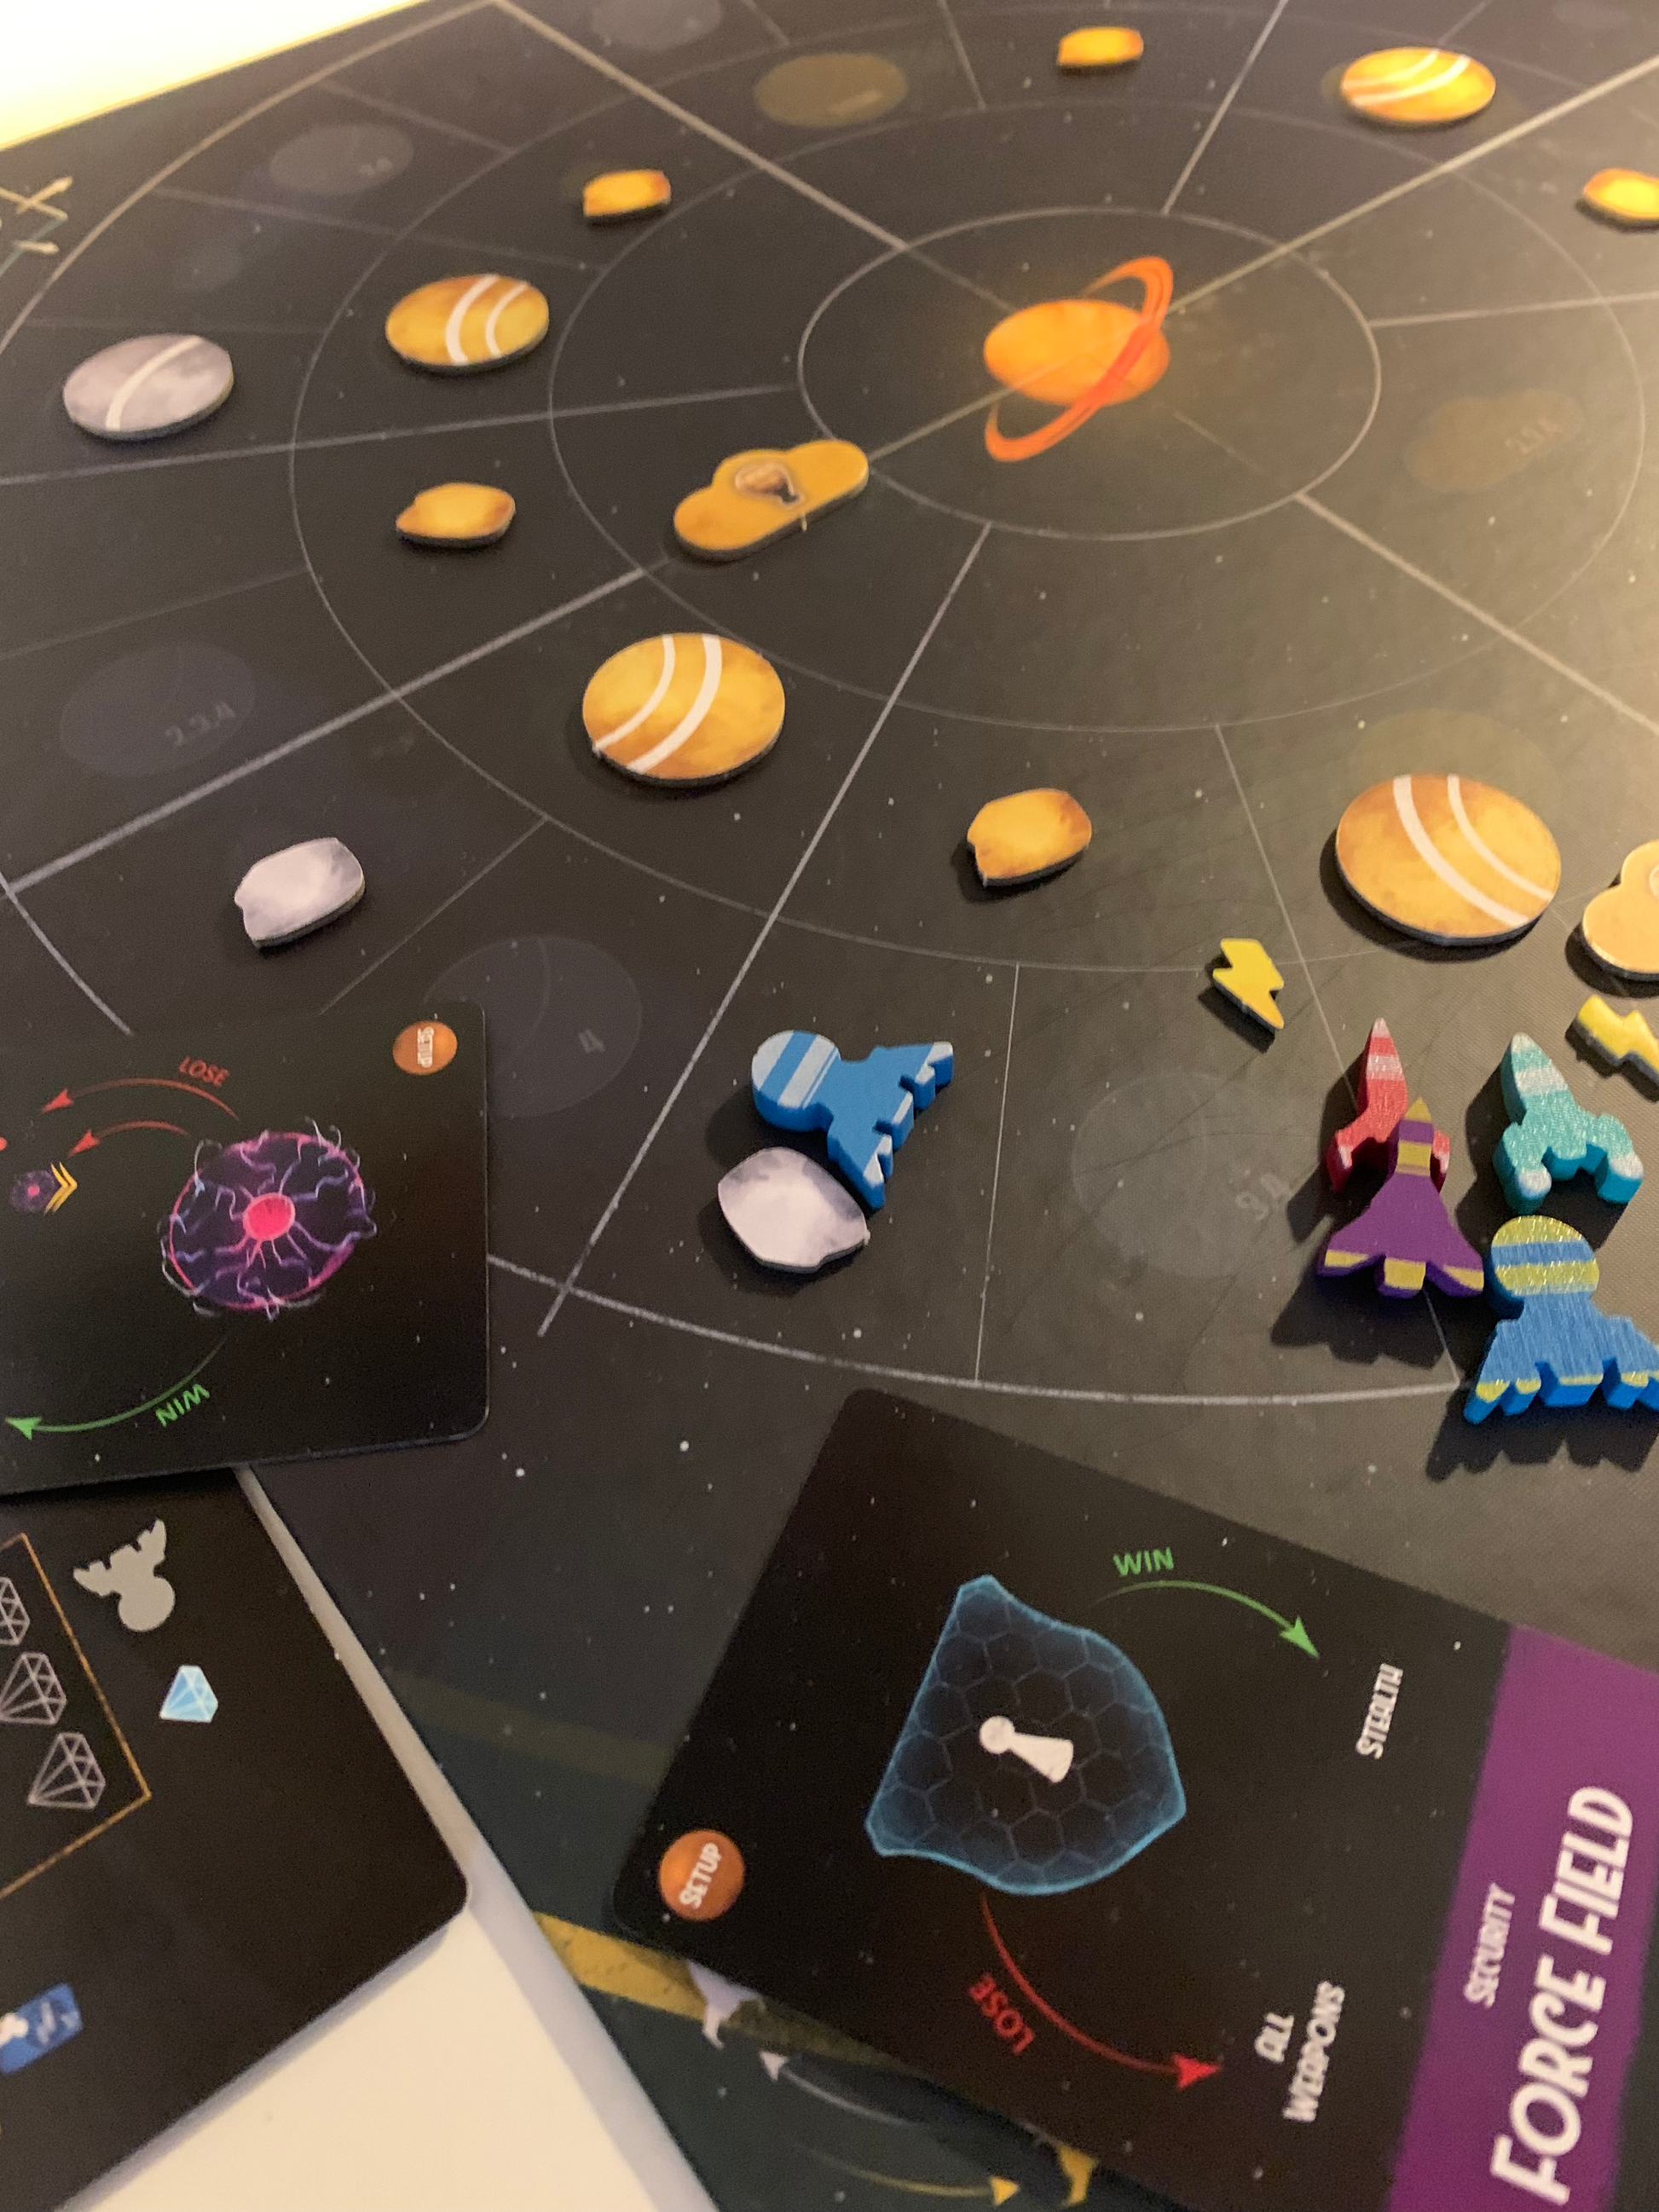 Dawn on Titan Board Game - game board action shot featuring space ship pieces and game cards